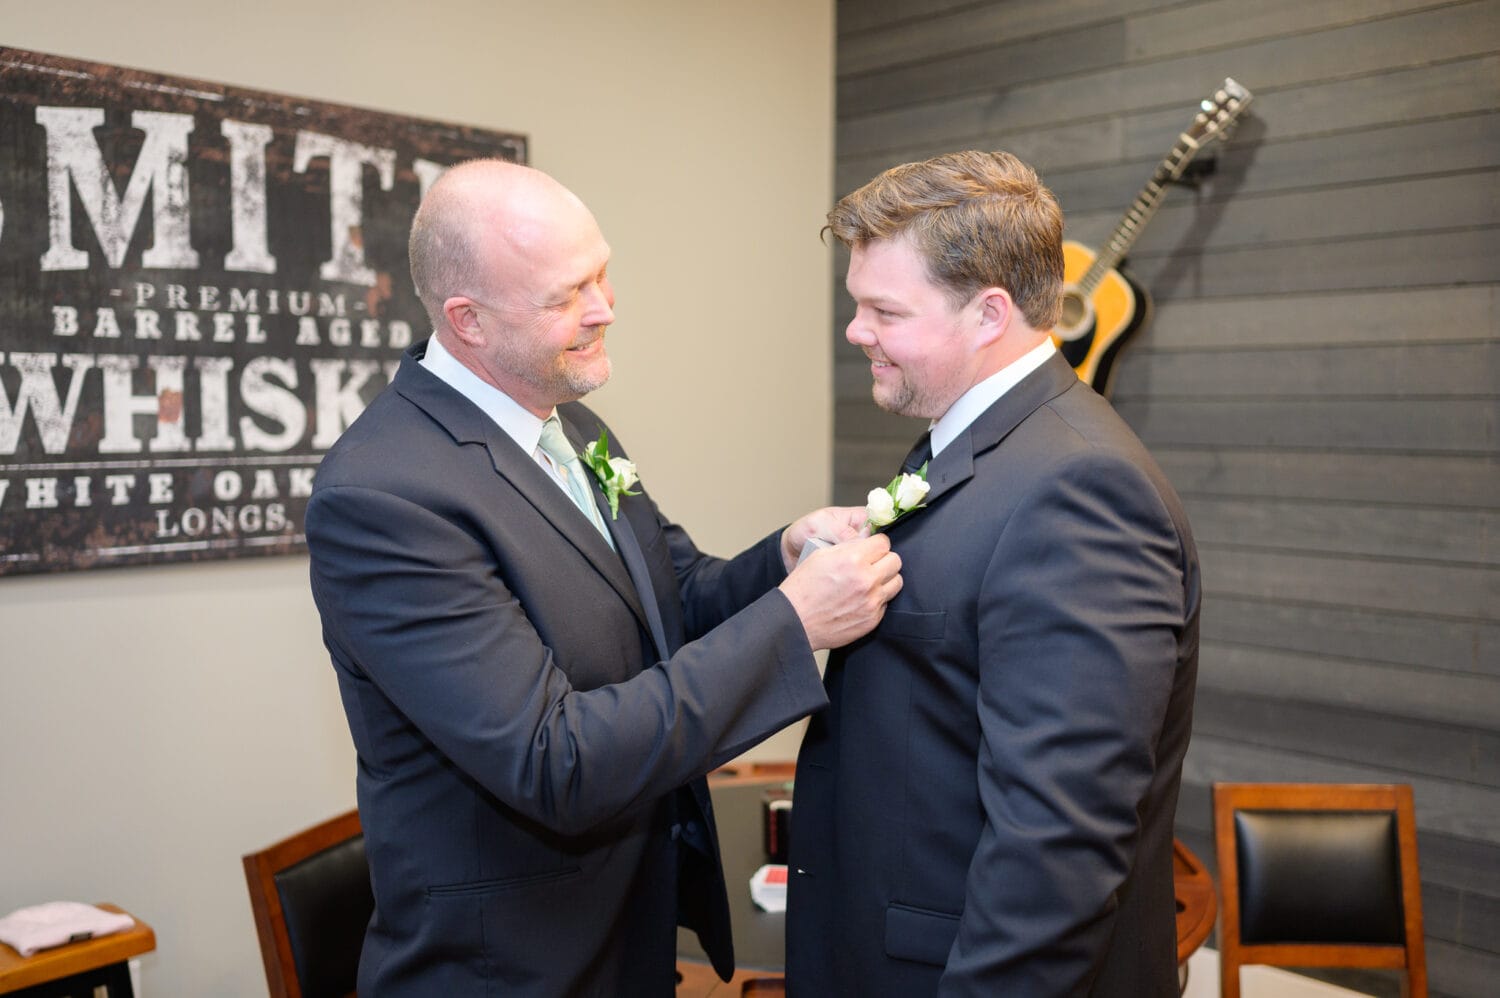 Groom's father putting on his boutonniere  - The Venue at White Oaks Farm